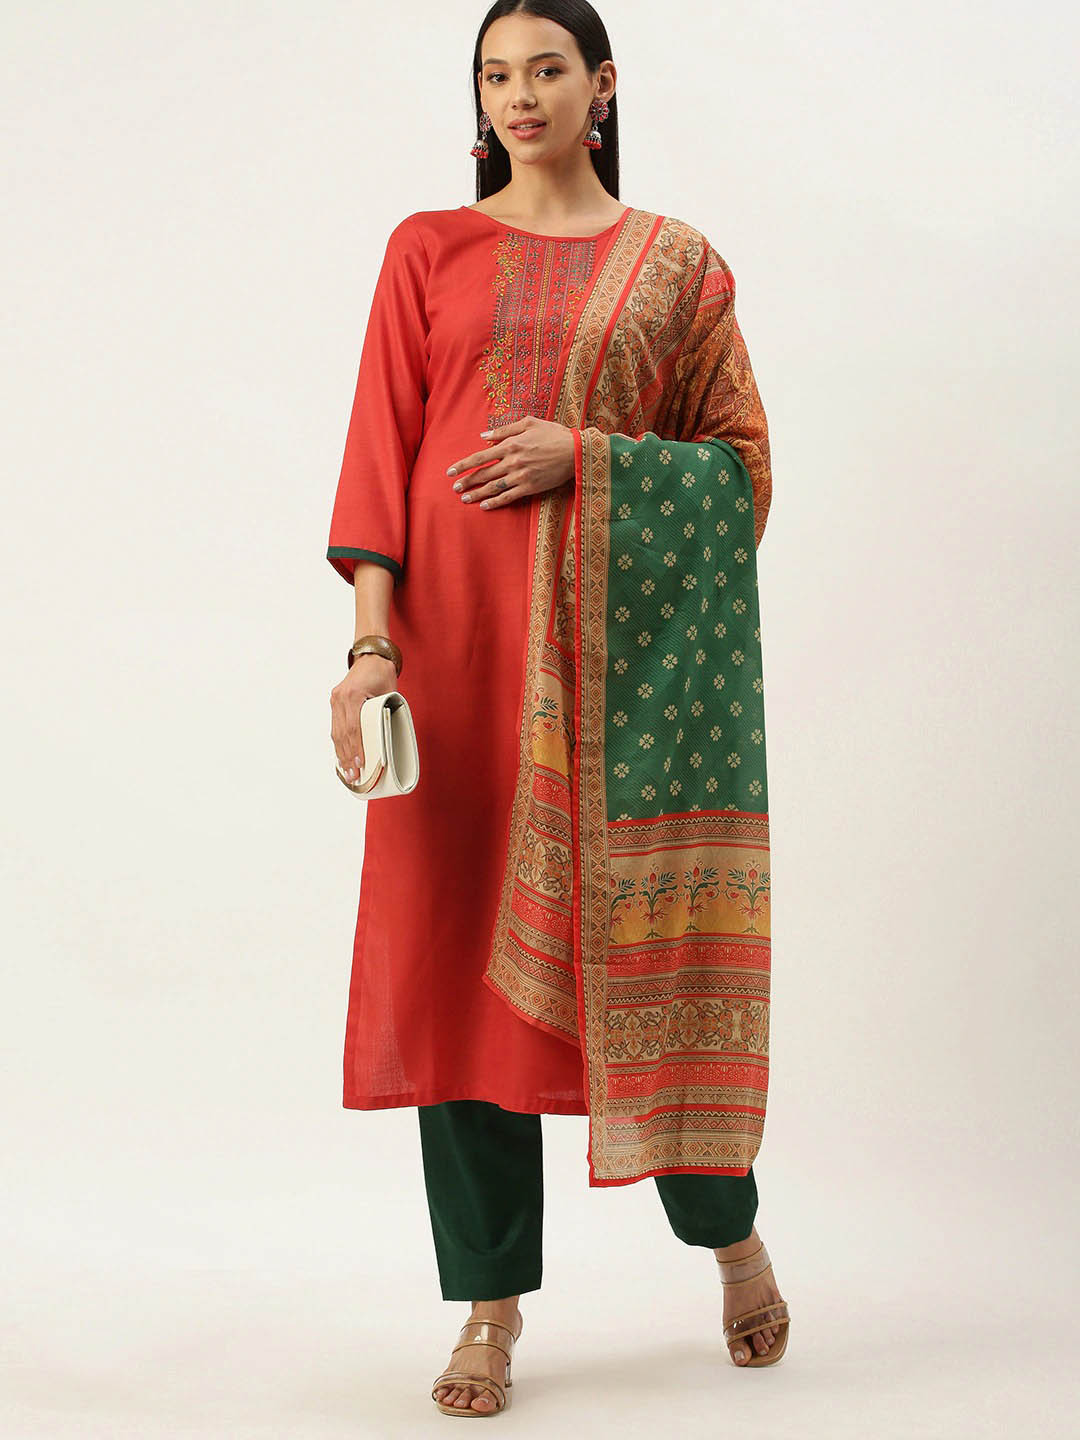 Red Unstitched Embroidered Cotton Salwar Suit Dress Material - Stilento